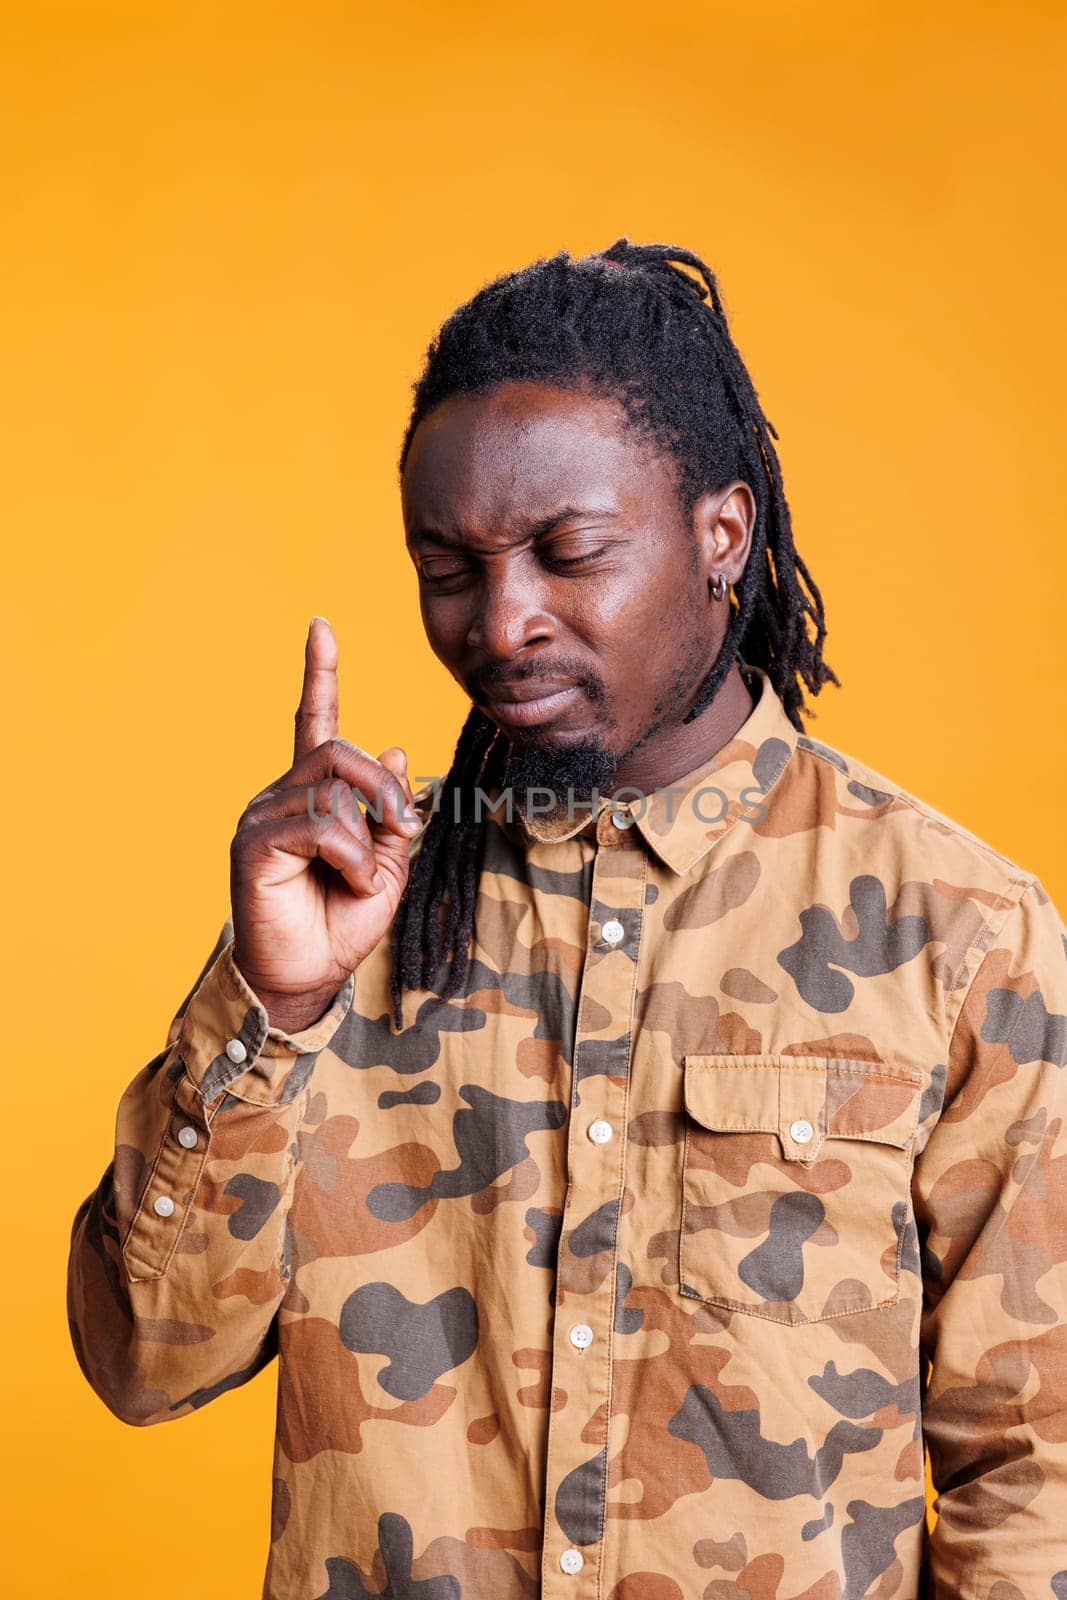 Concentrated man brainstorming ideas to find solution, taking thoughts into consideration while posing over yellow background in studio. Uncertain young adult contemplating about serious problem.